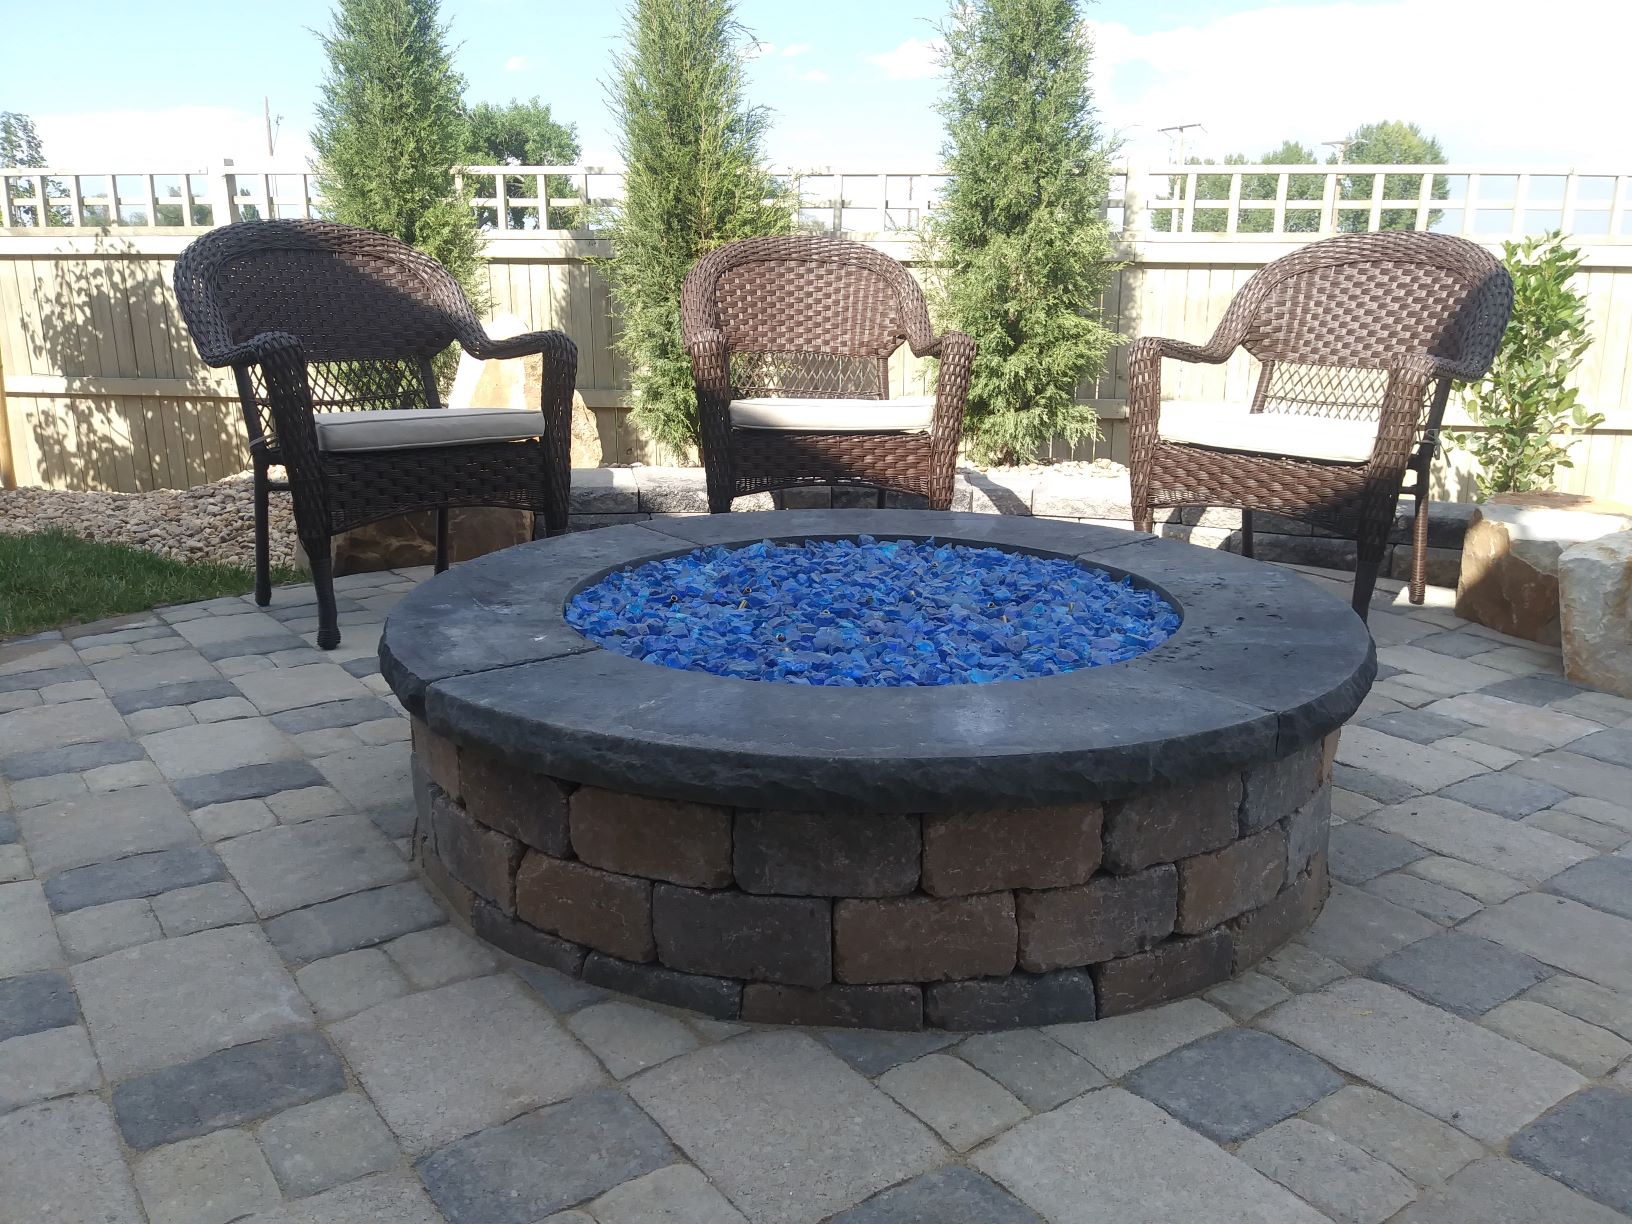 Center Bright blue rock pit with brick laid patio and seating area.